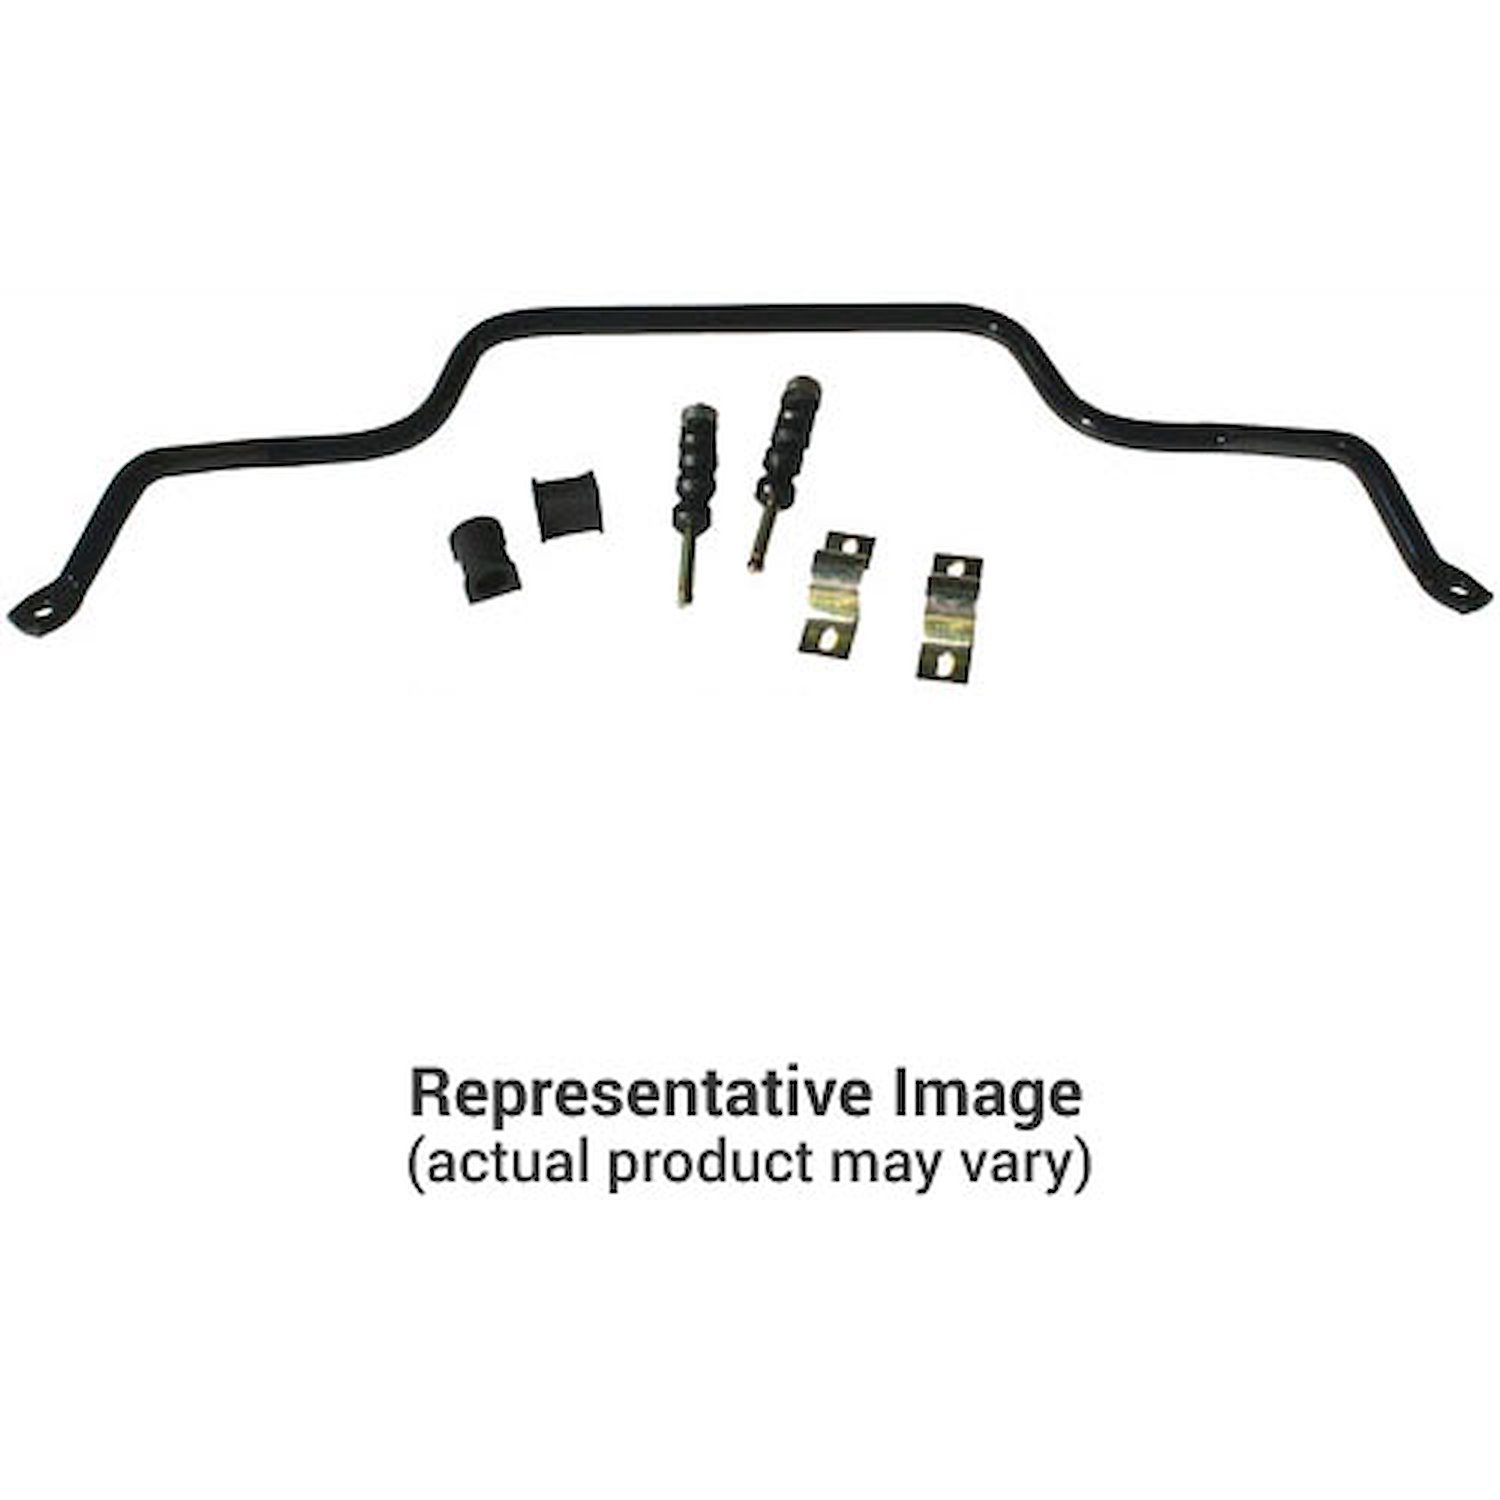 1 3/8" Front Sway Bar 2002-08 Dodge 2500/3500 4WD